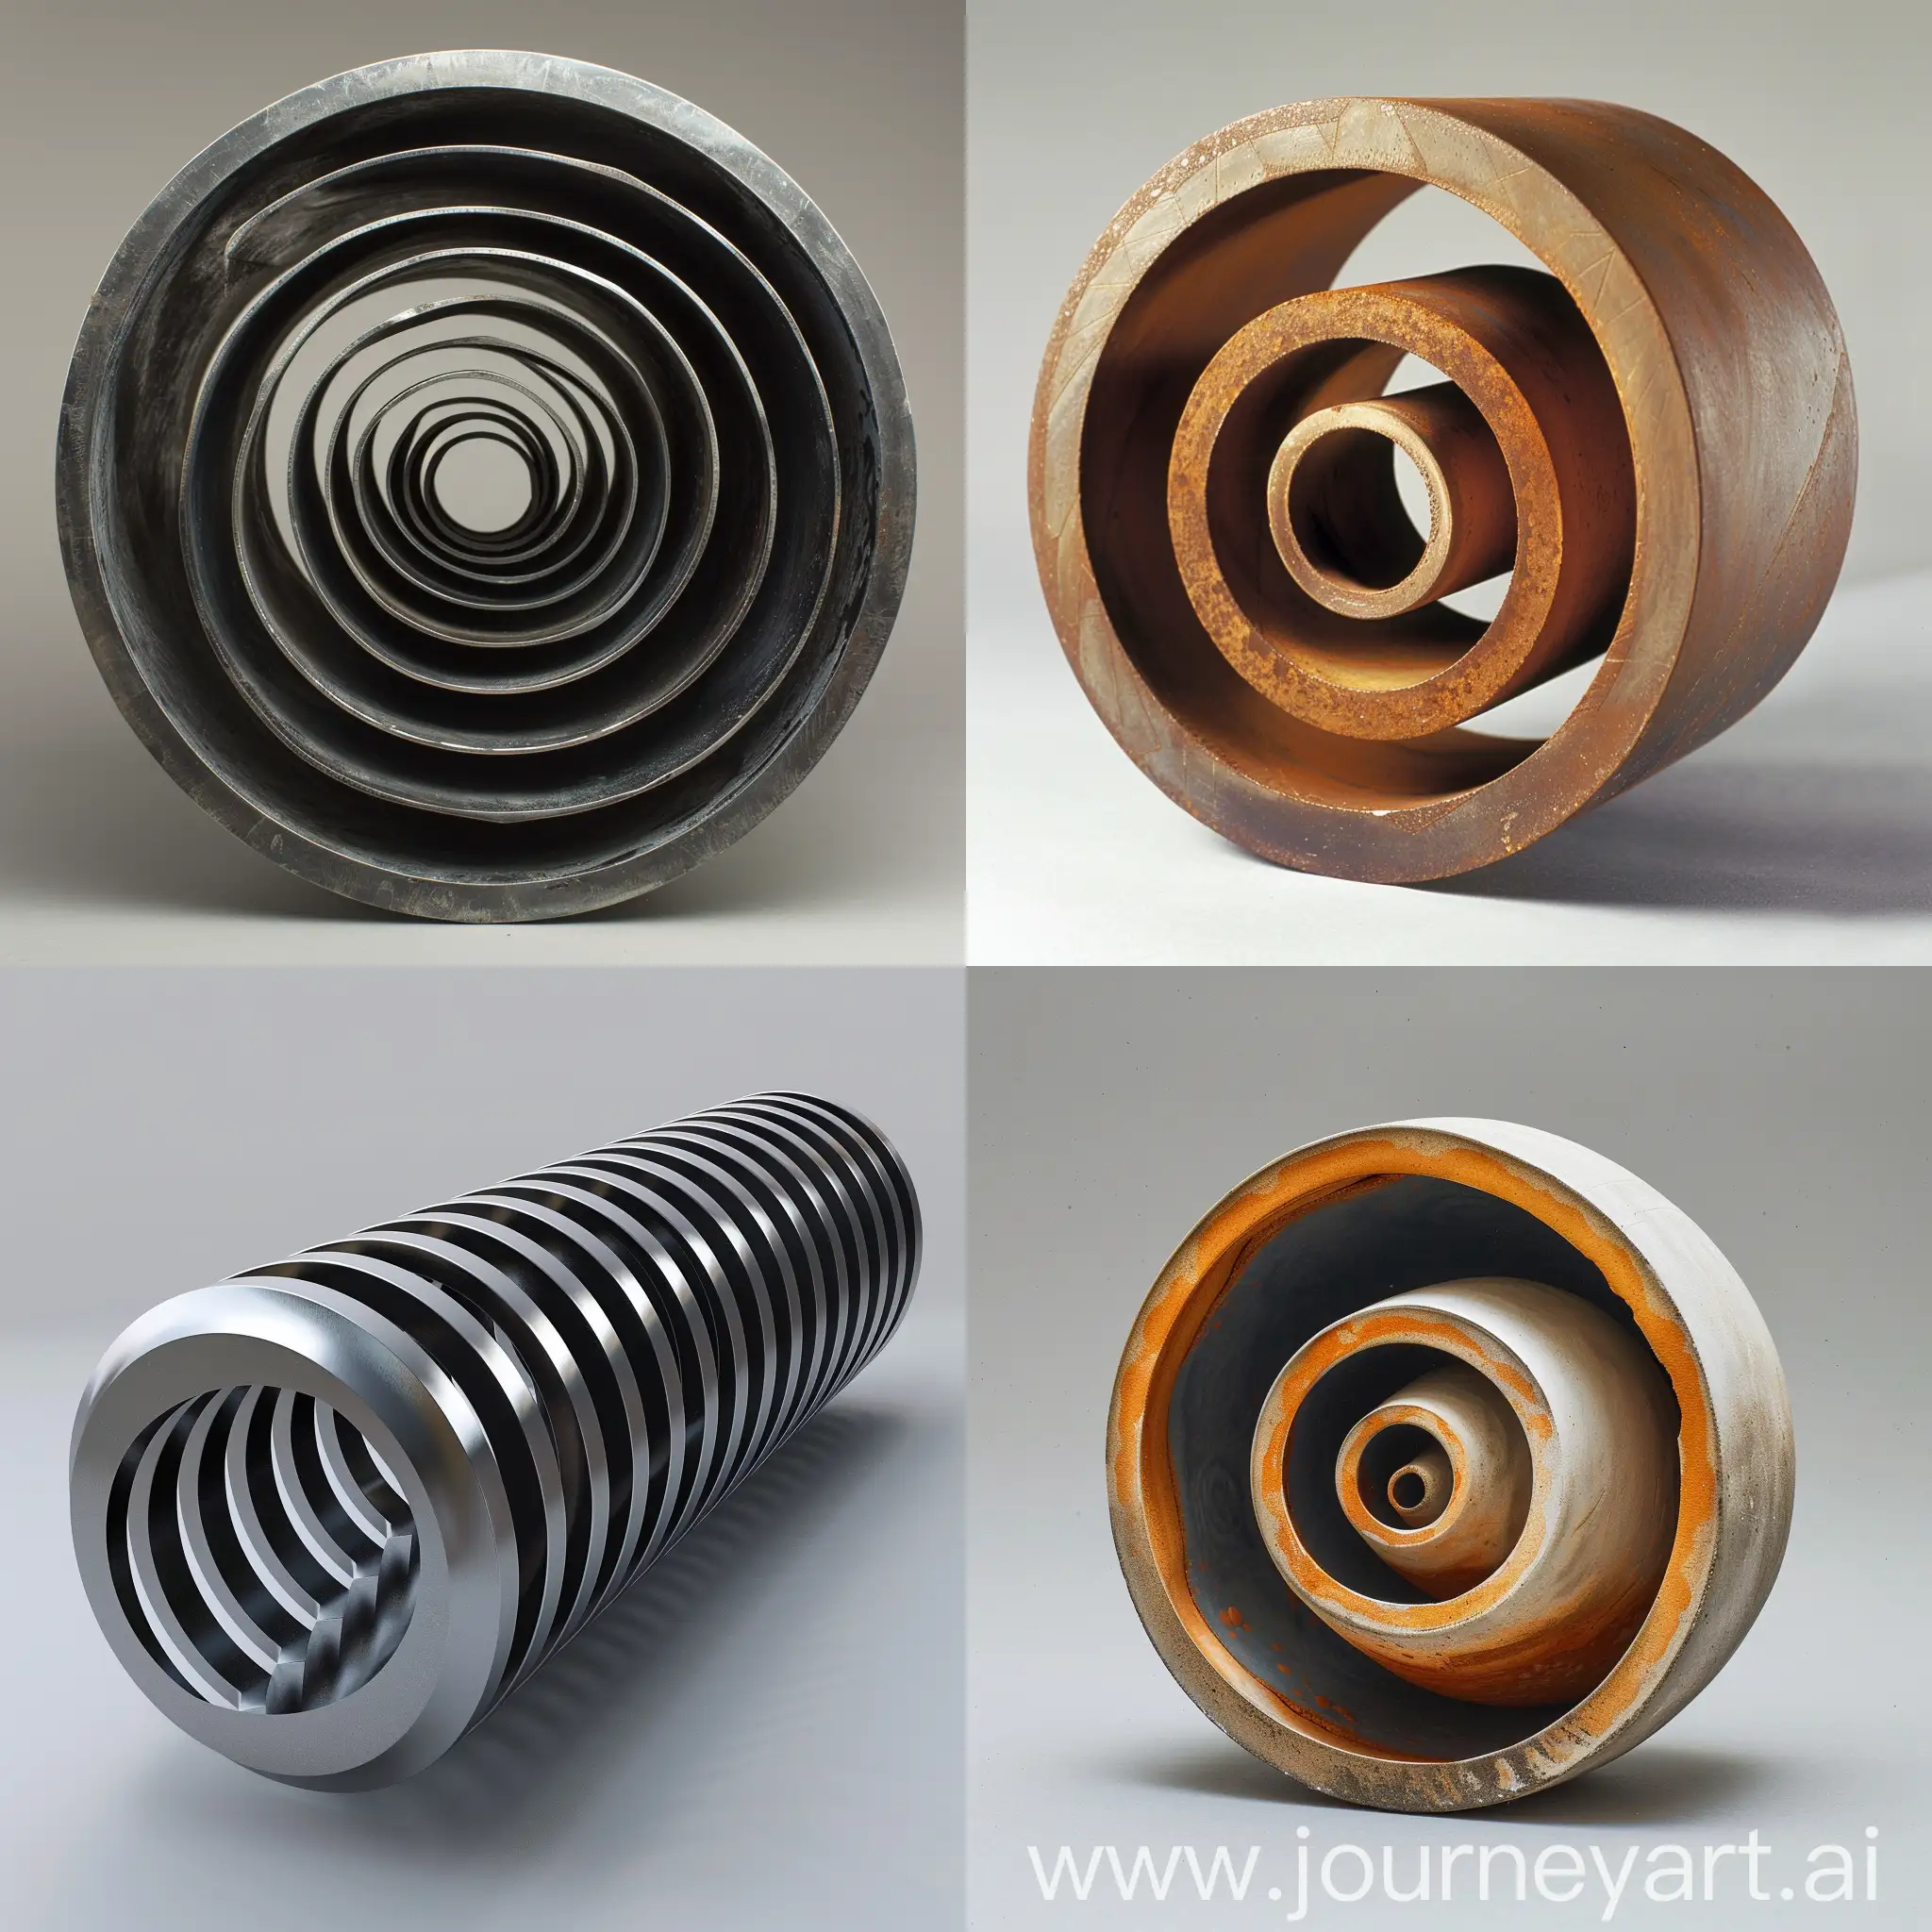 Spiraling-Flat-Cylinder-with-Internal-Channel-Creative-3D-Visualization